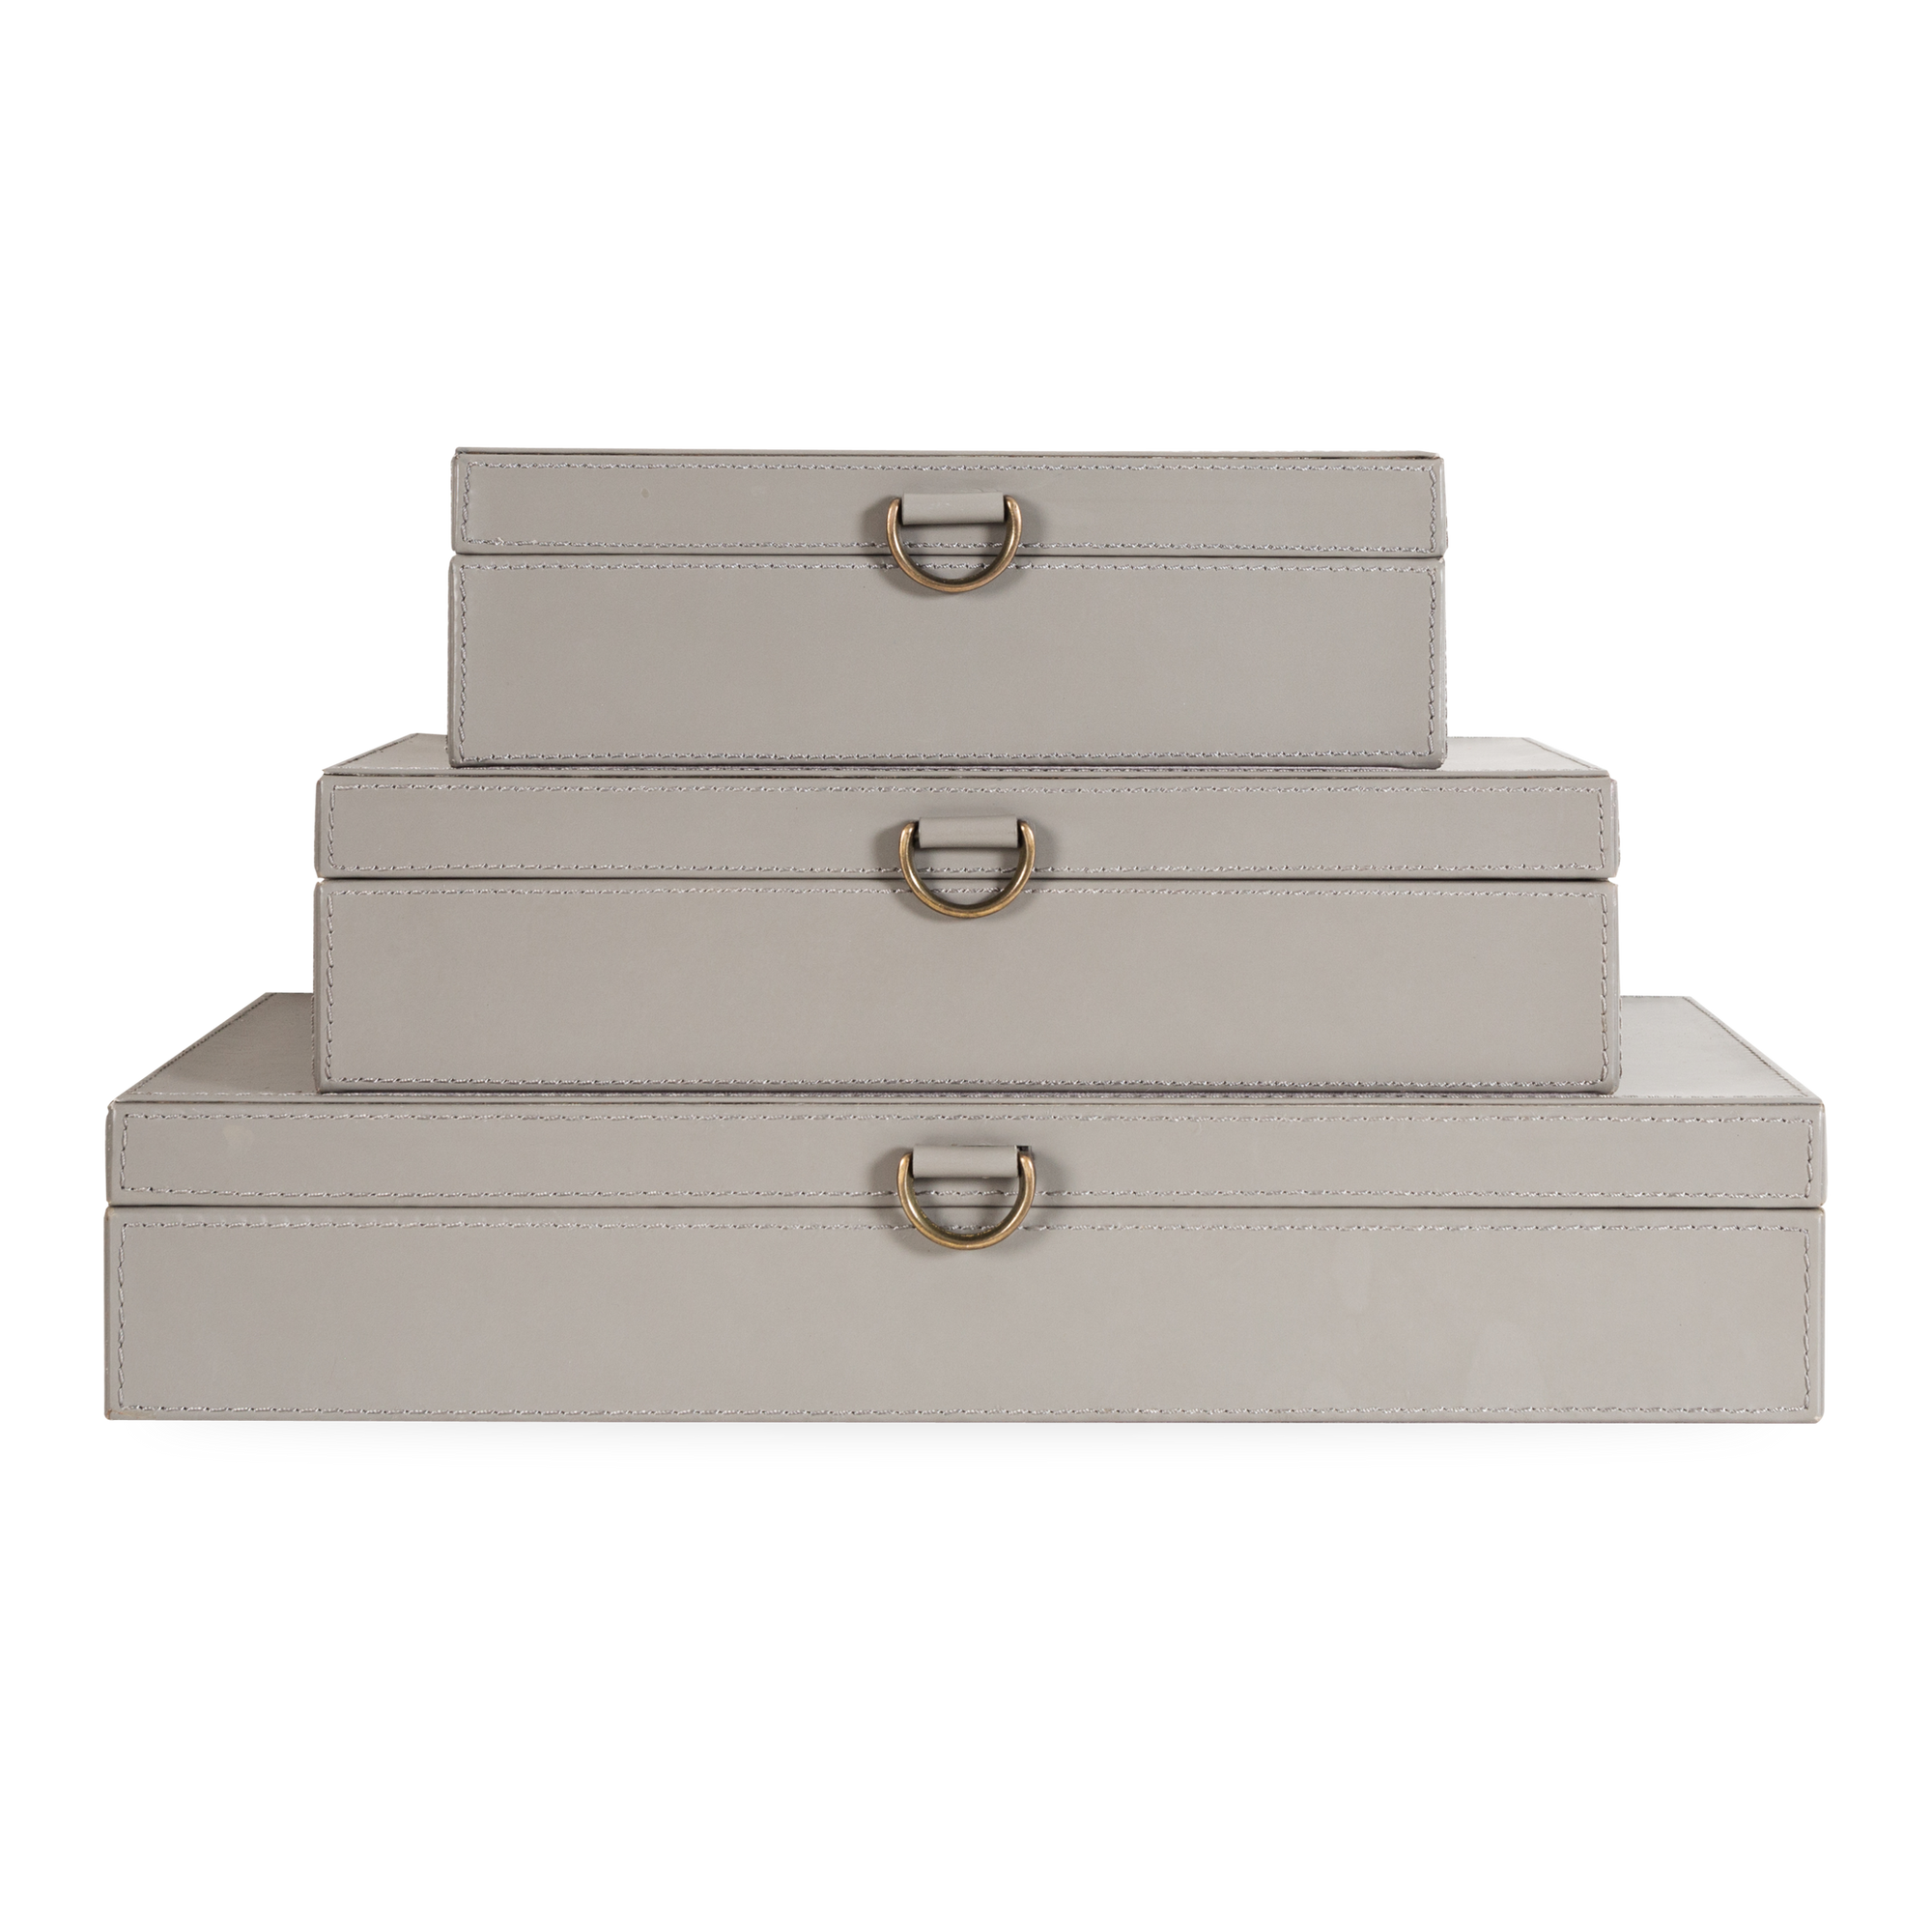 Elegant and cleanly designed, The Marbled Leather Box is covered in lightly textured grey leather and lined with luxurious suede.